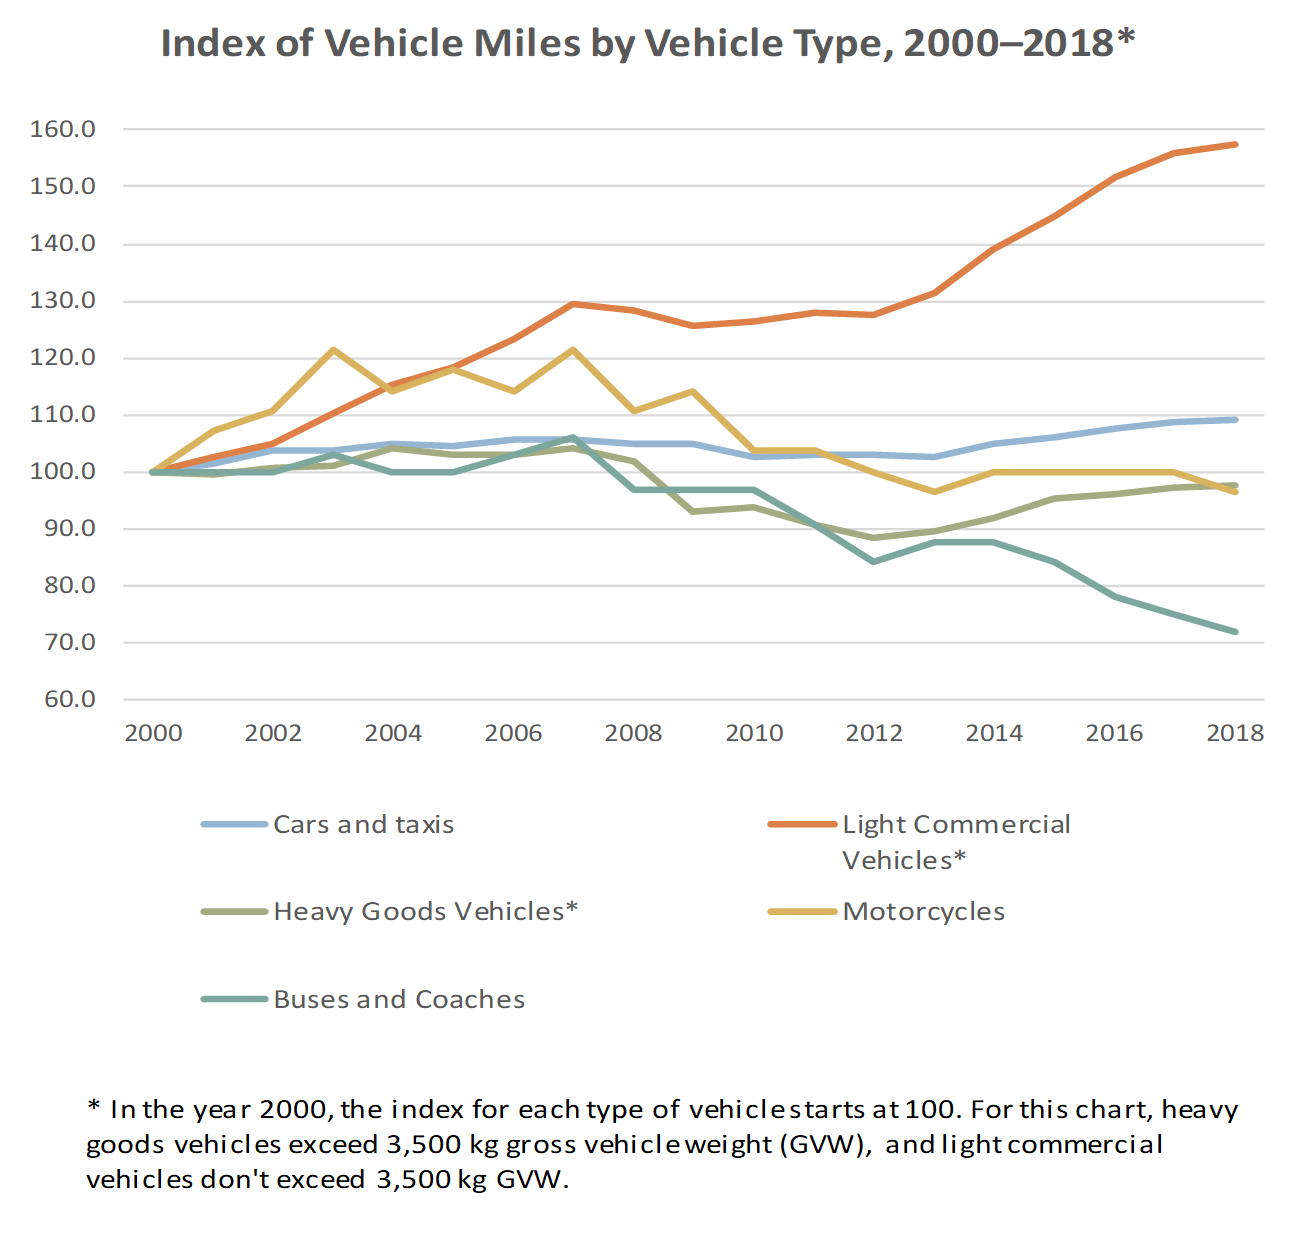 Index of Vehicle Miles by Vehicle Type, 2000-2018